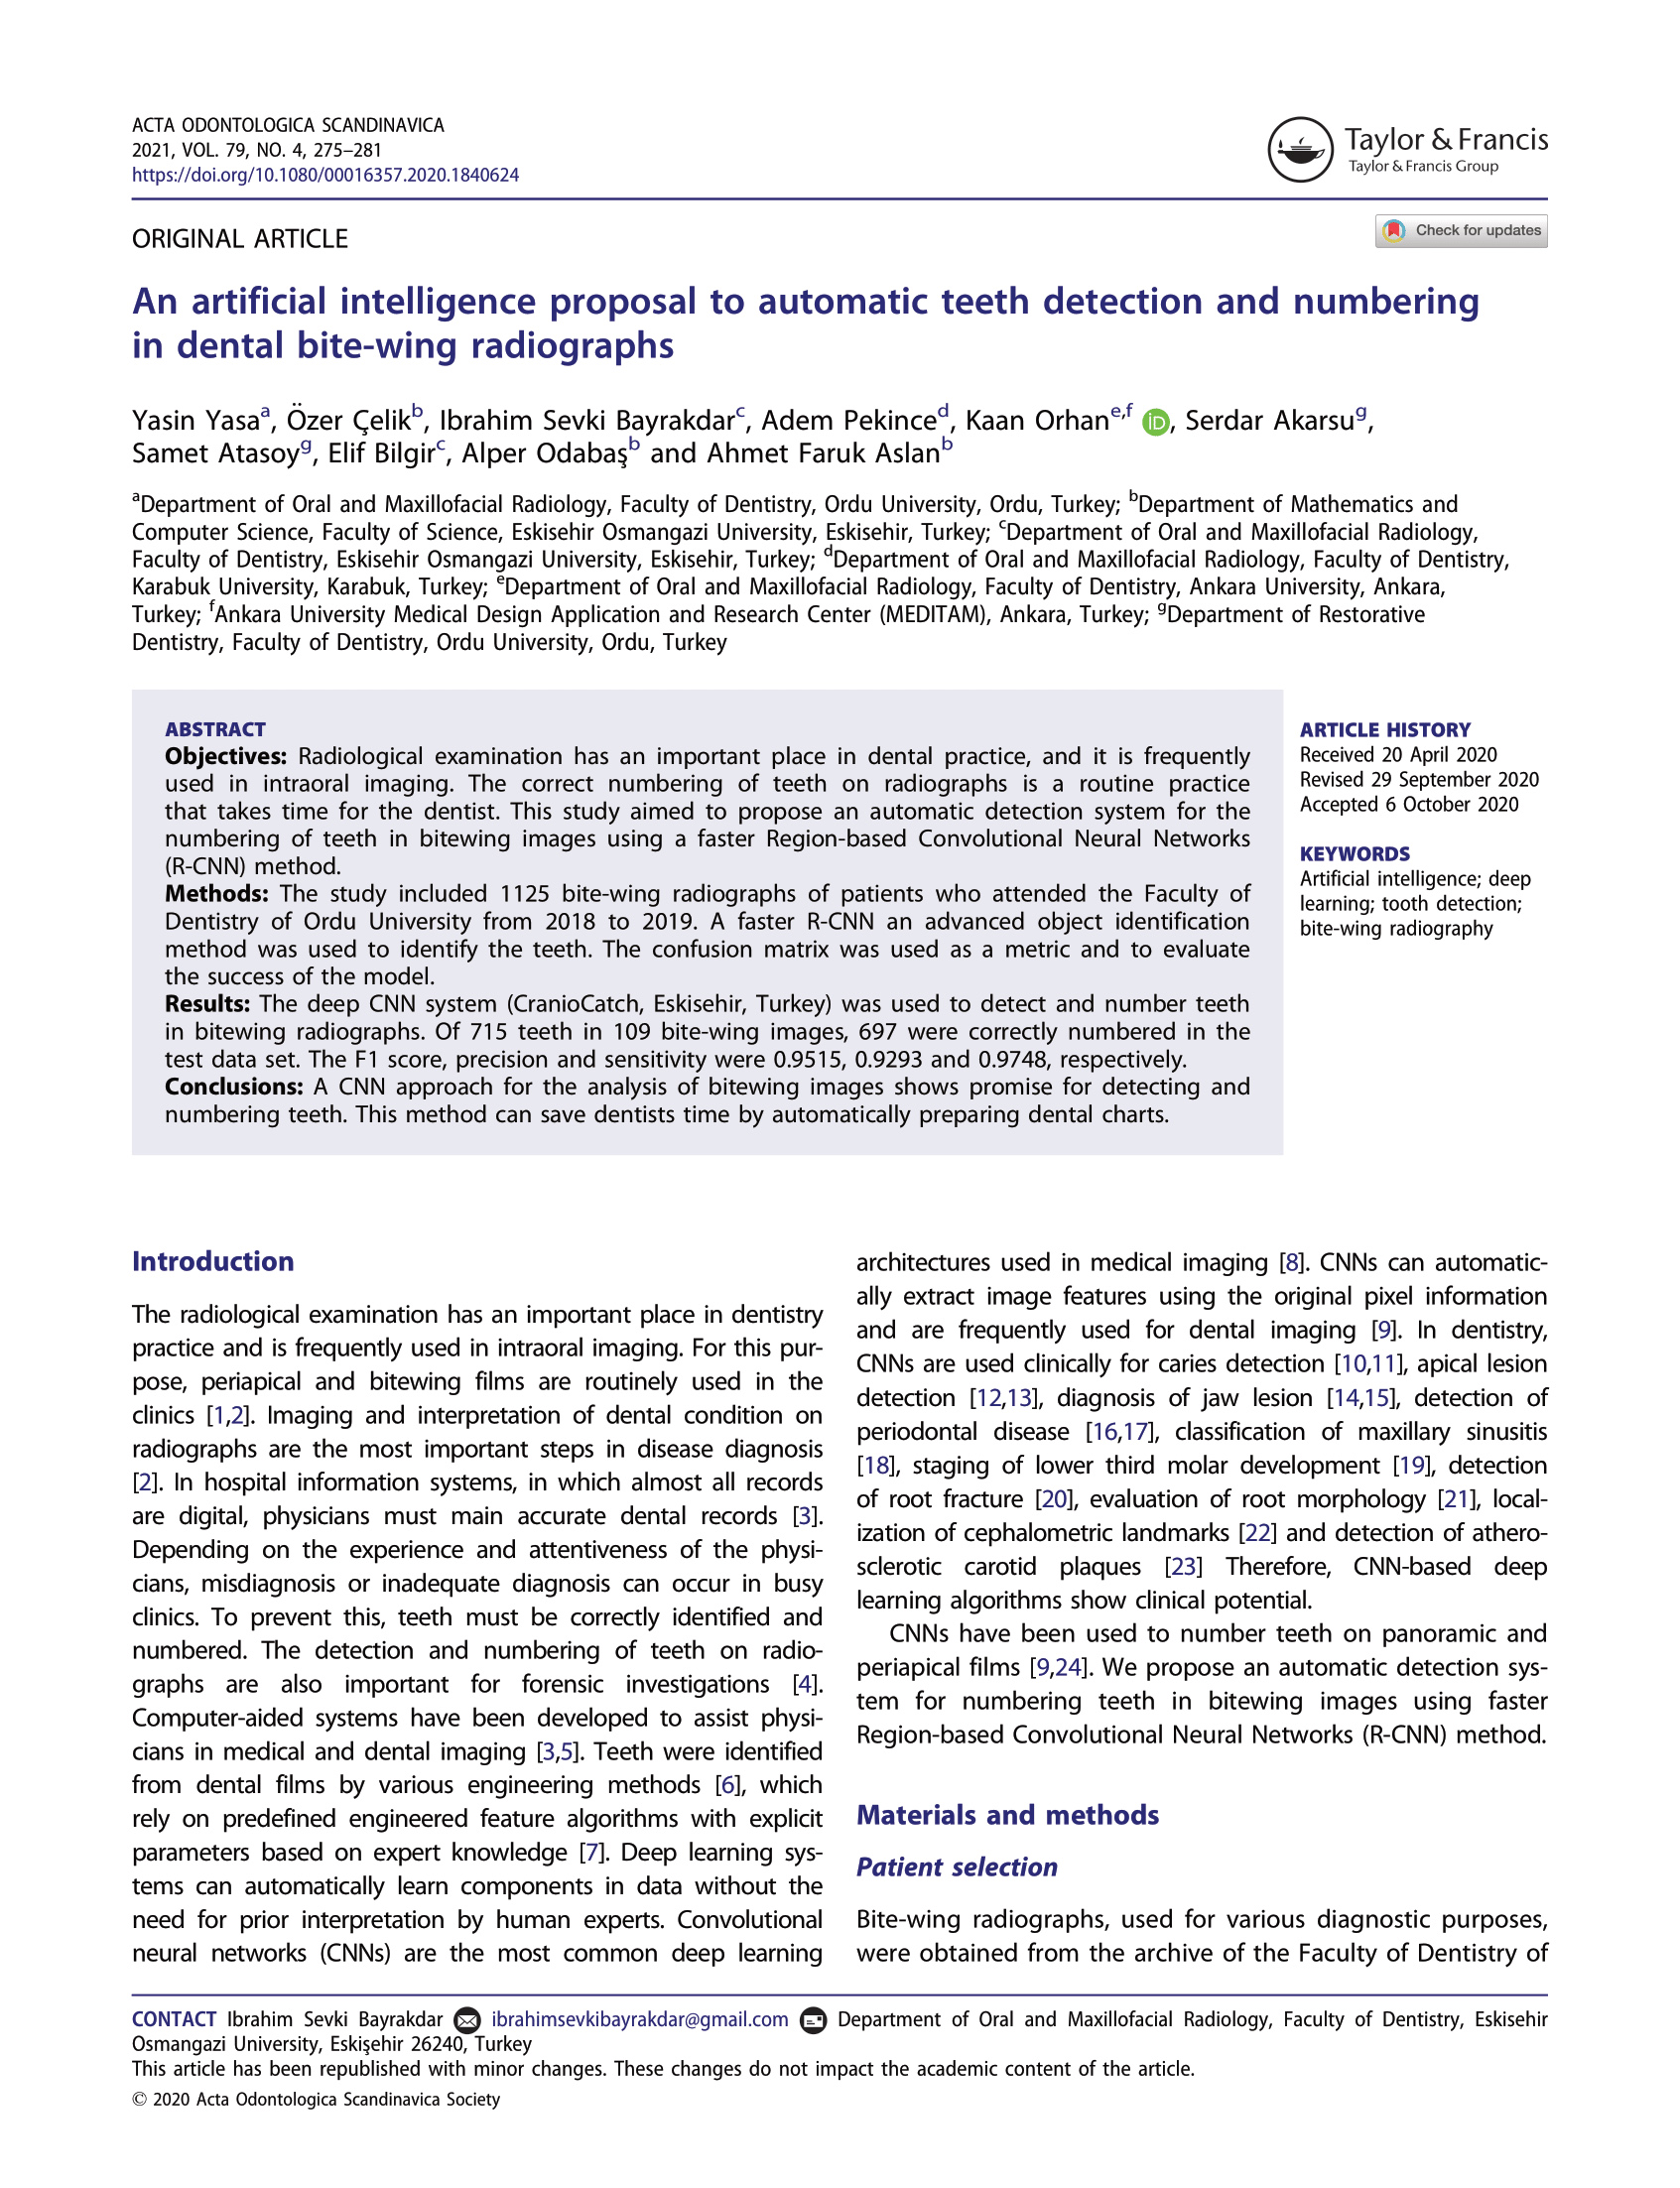 An artificial intelligence proposal to automatic teeth detection and numbering in dental bite-wing radiographs